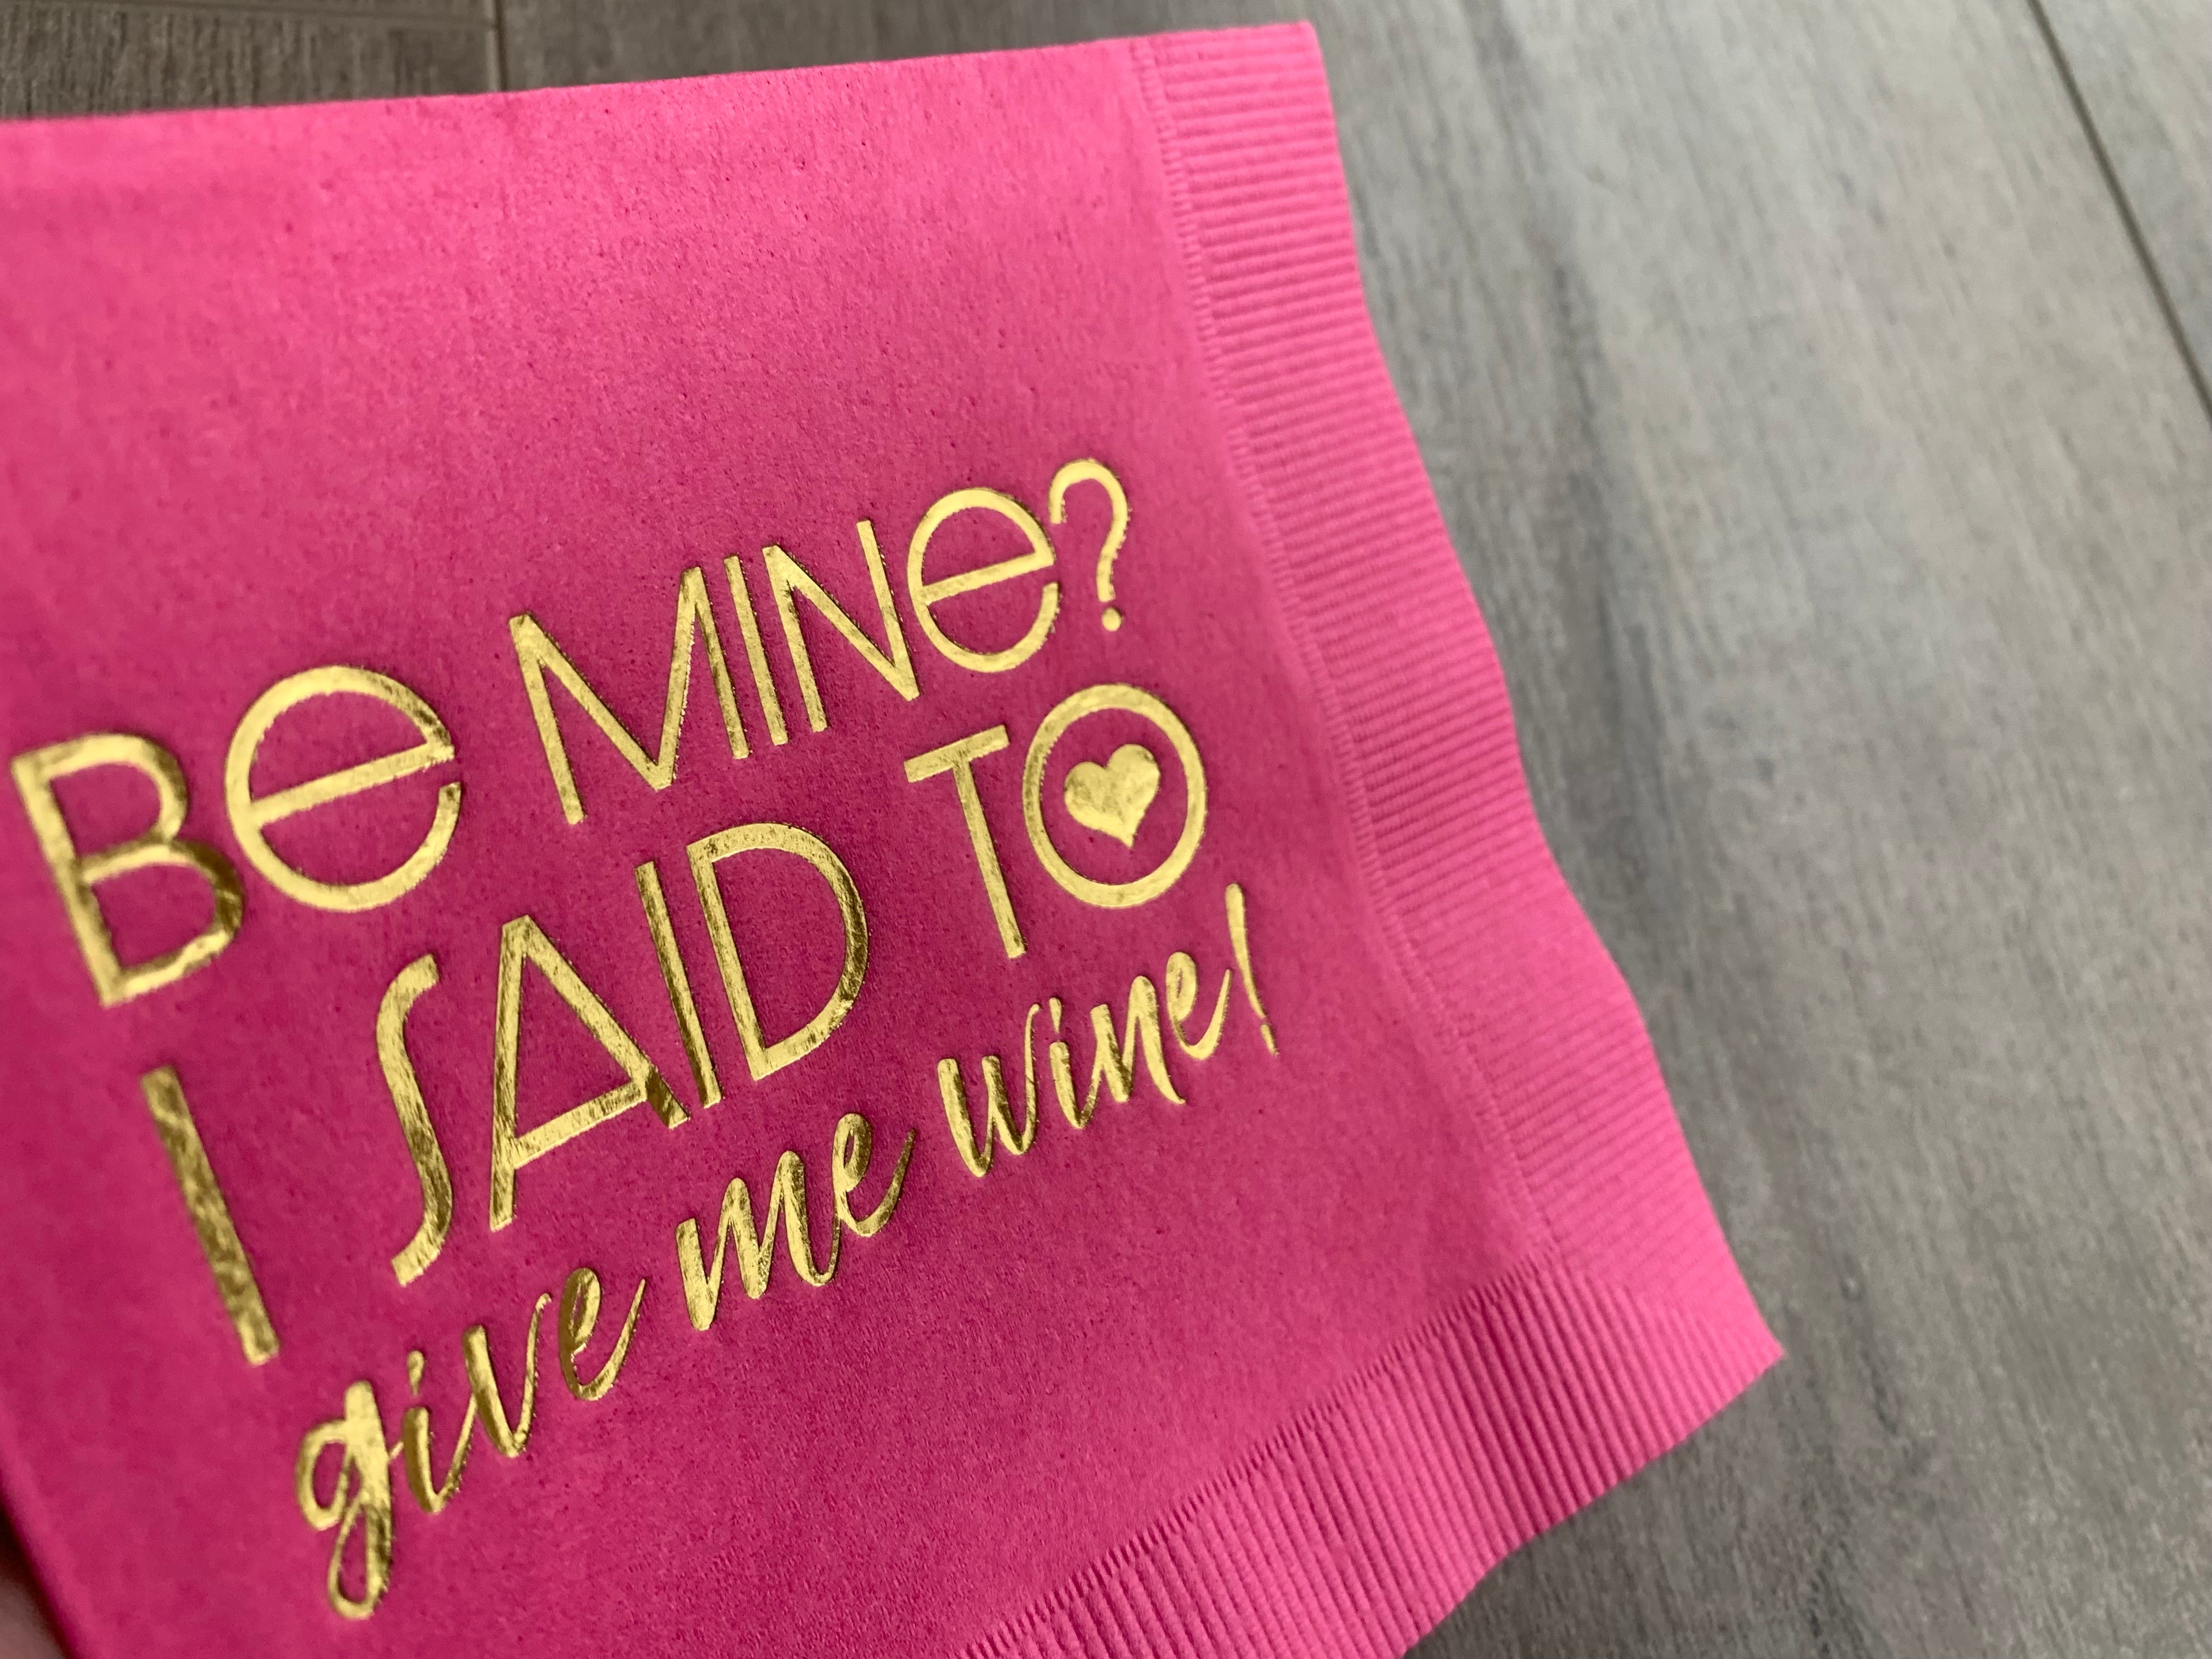 closeup image of gold foil printing on hot magenta pink cocktail napkin. Gold foil printing reads Be Mine? I said to give me wine! Funny cocktail napkin for valentine's day with your significant other or best girl friends!